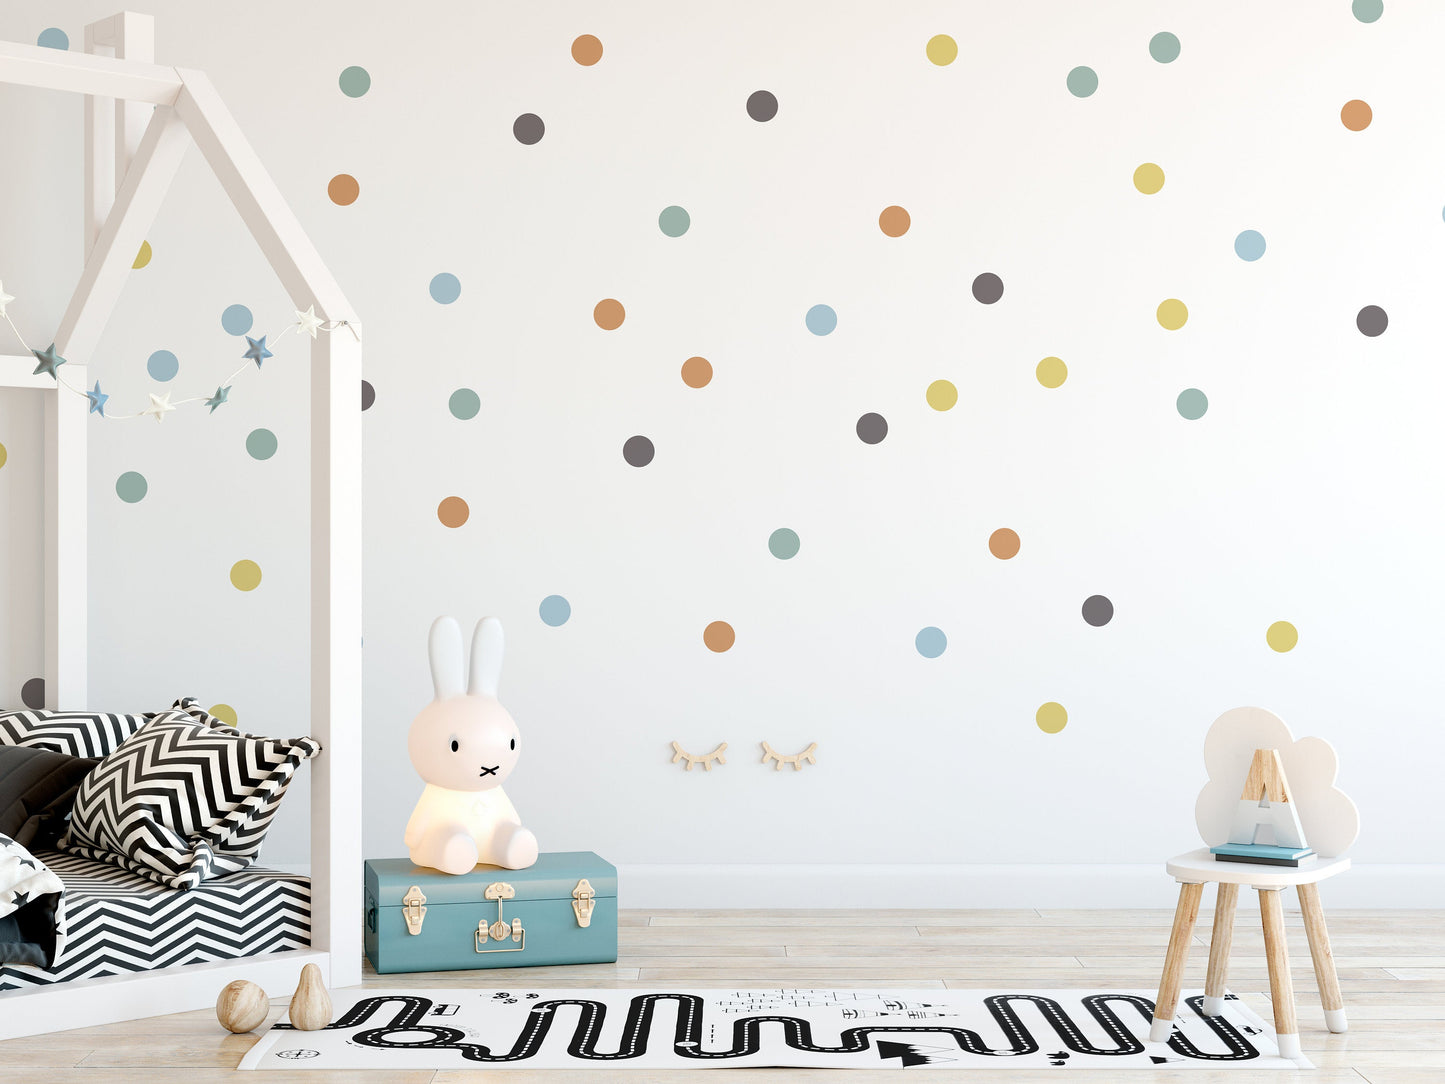 Colourful Chic Polka Dot Wall Stickers Decals